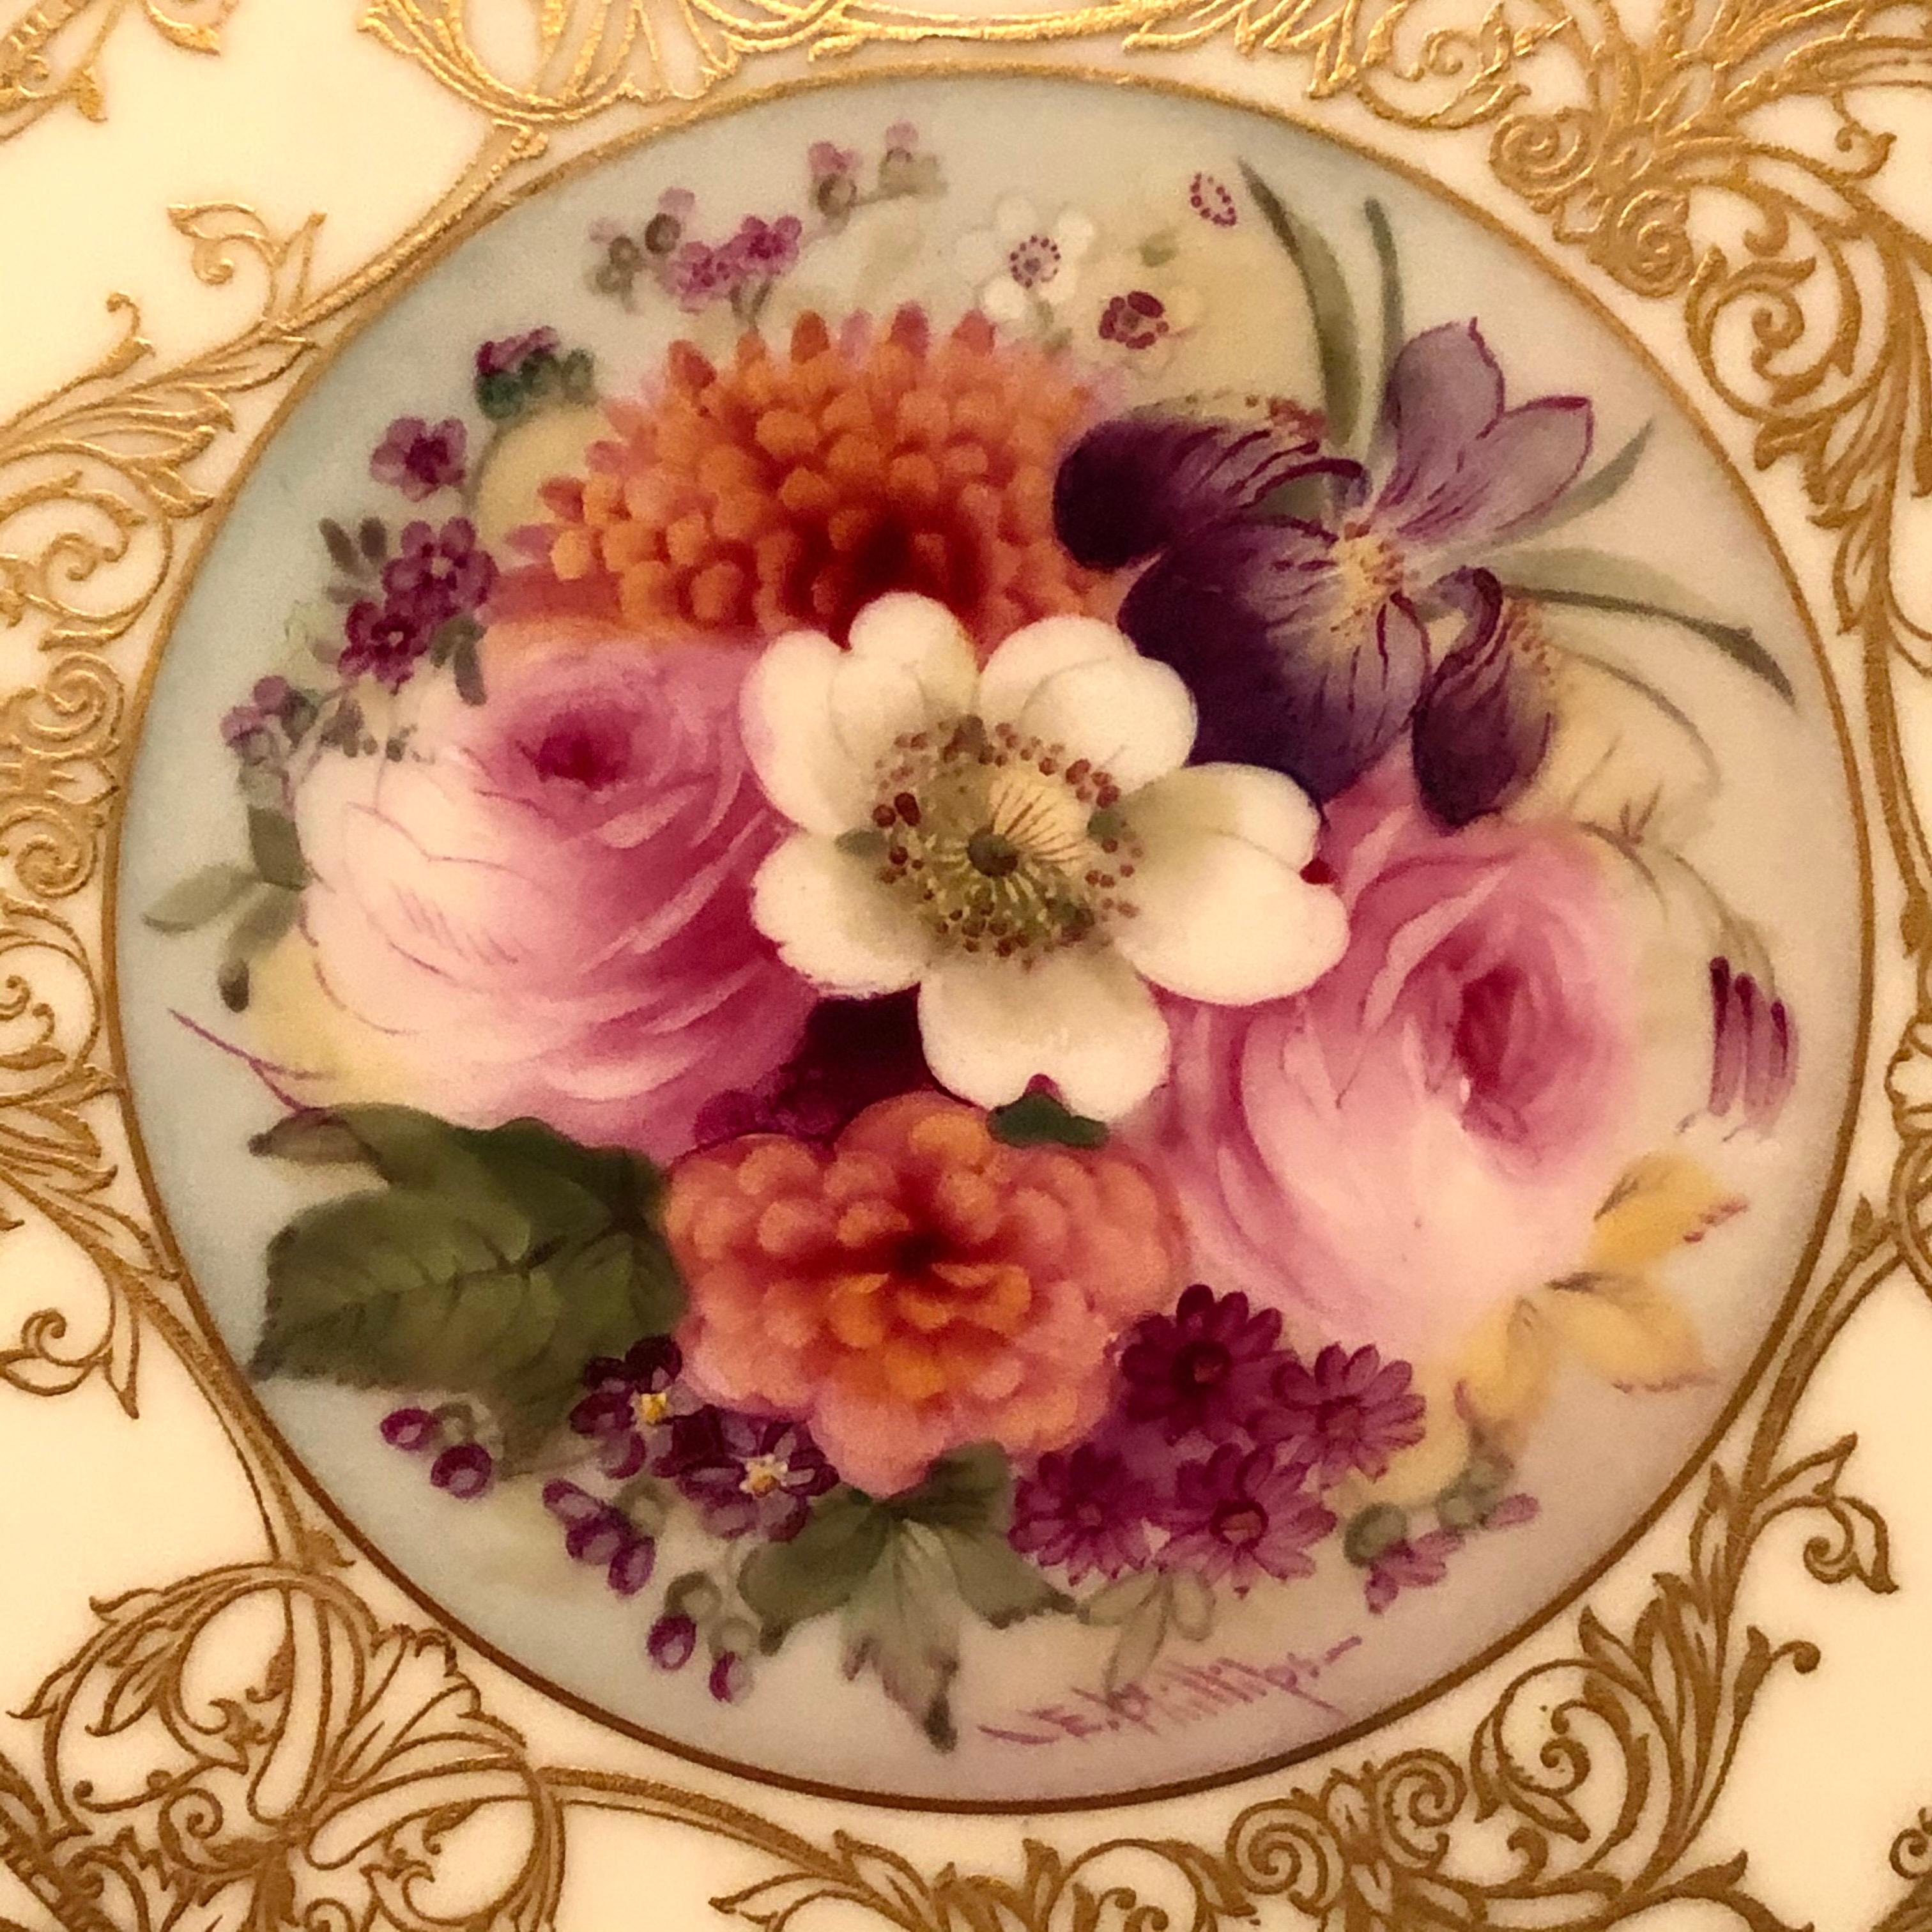 This is a stunning set of Royal Worcester dinner plates, each hand painted with different beautiful flower bouquets. These plates are artist signed E. Phillips, who was an artist who specialized in painting flowers at the Royal Worcester company.